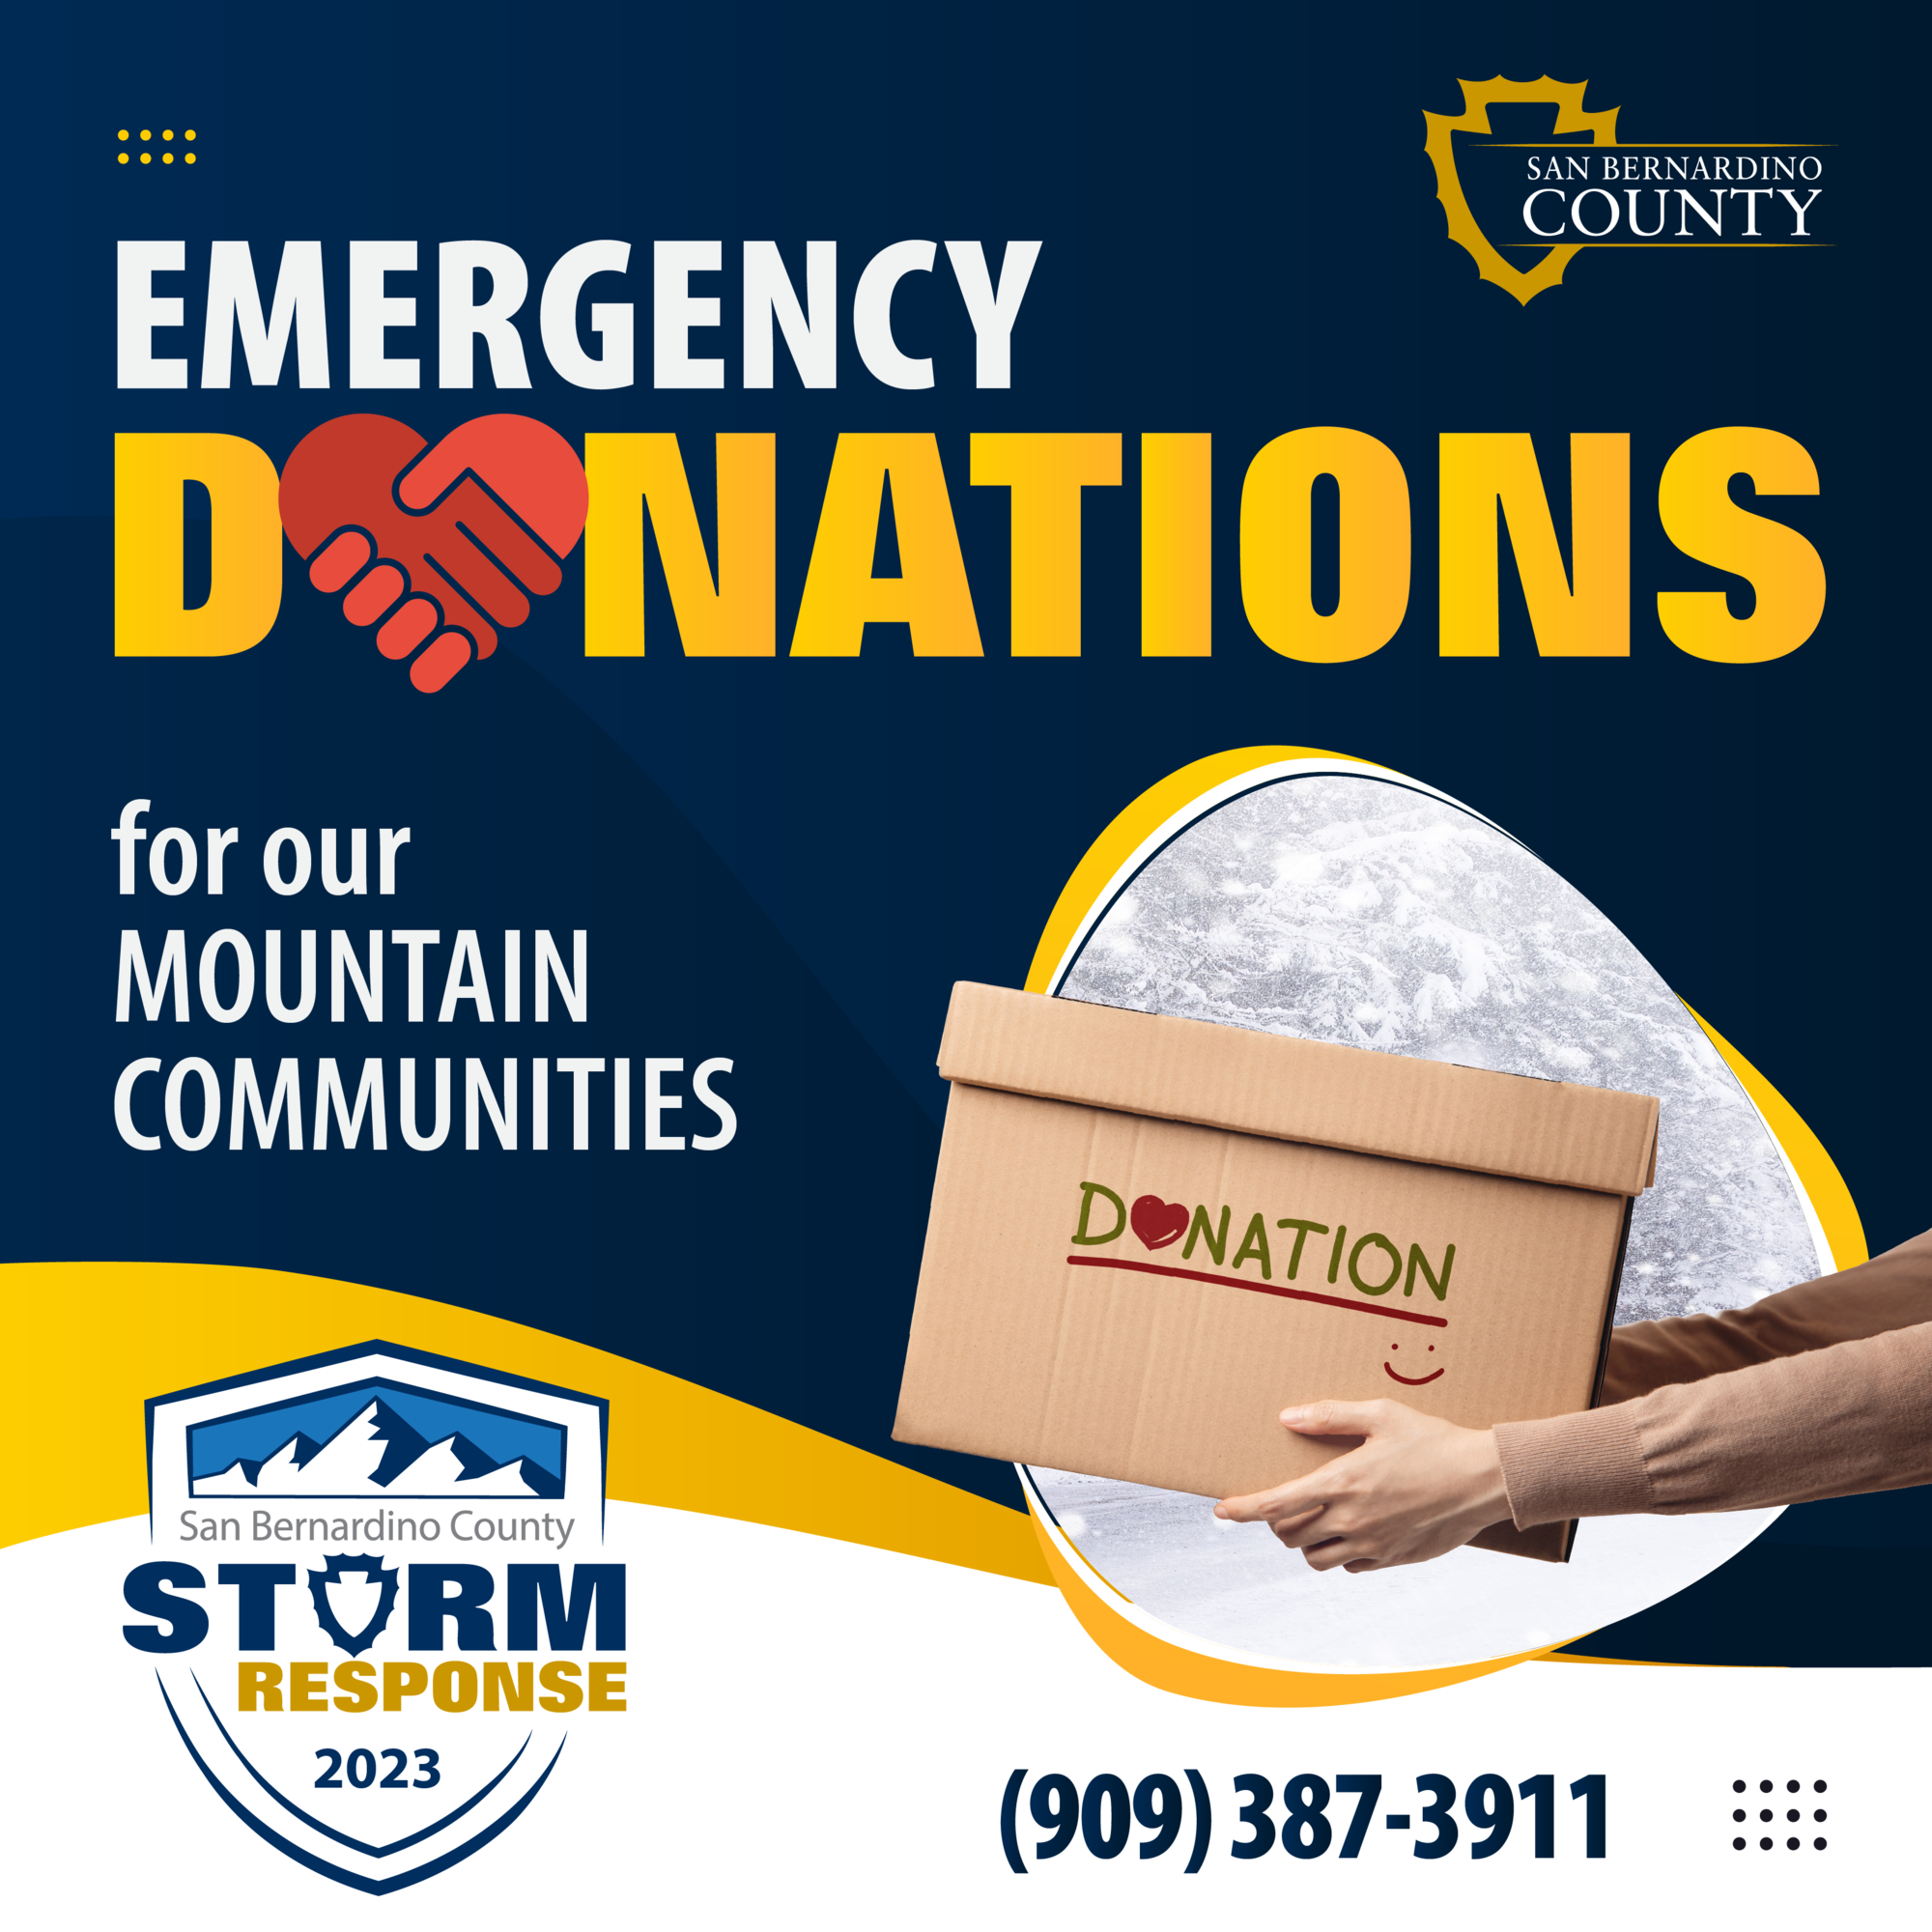 Emergency Donations for our mountain communities